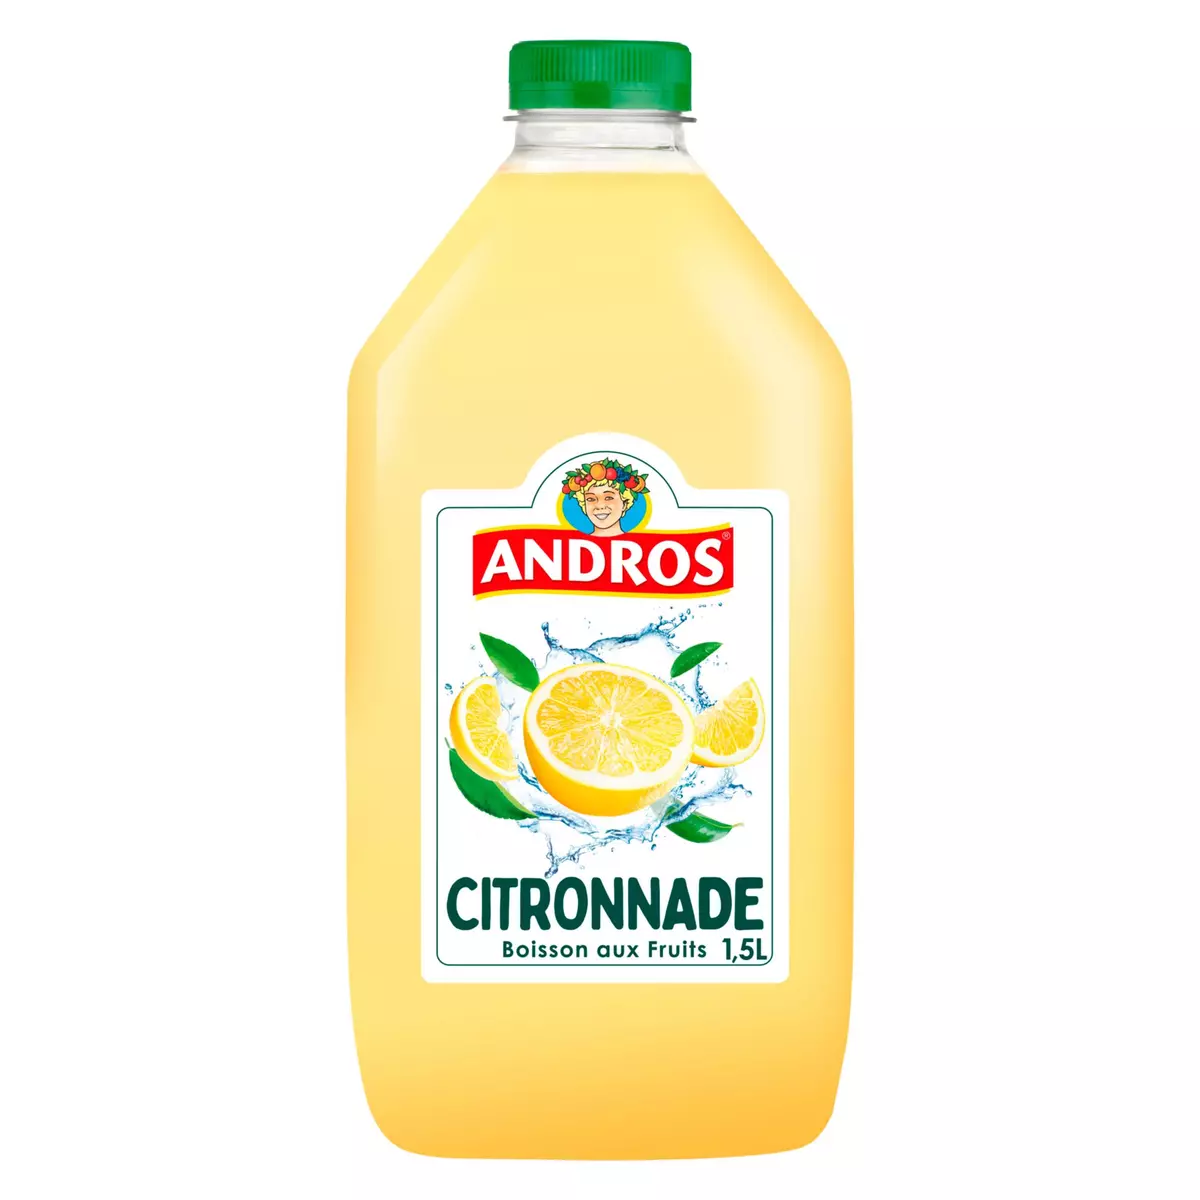 ANDROS Citronnade 1,5L